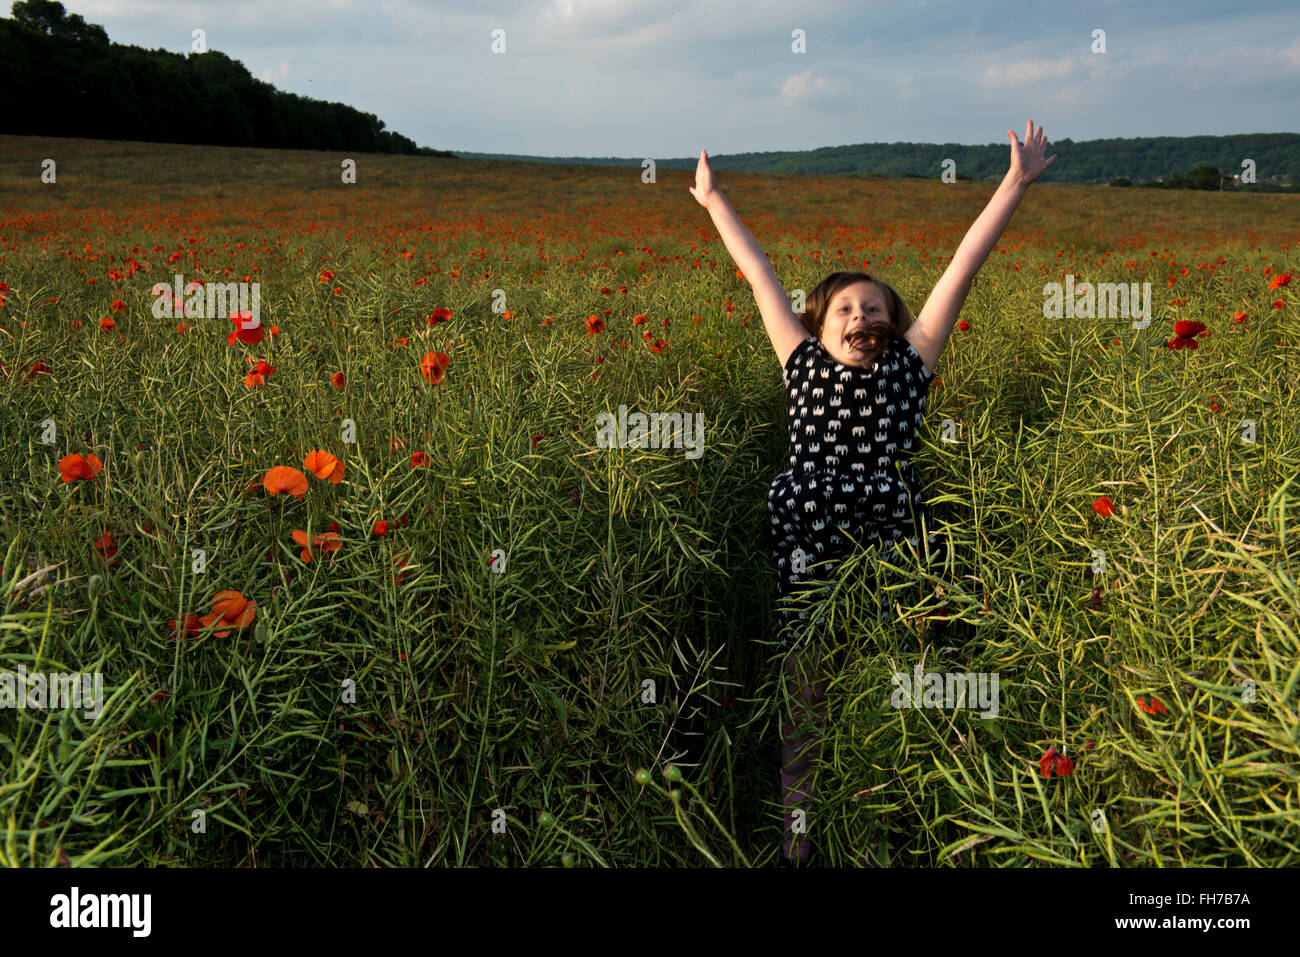 Model released image of a young girl jumping in a poppy field, near Tring, Hertfordshire, UK Stock Photo